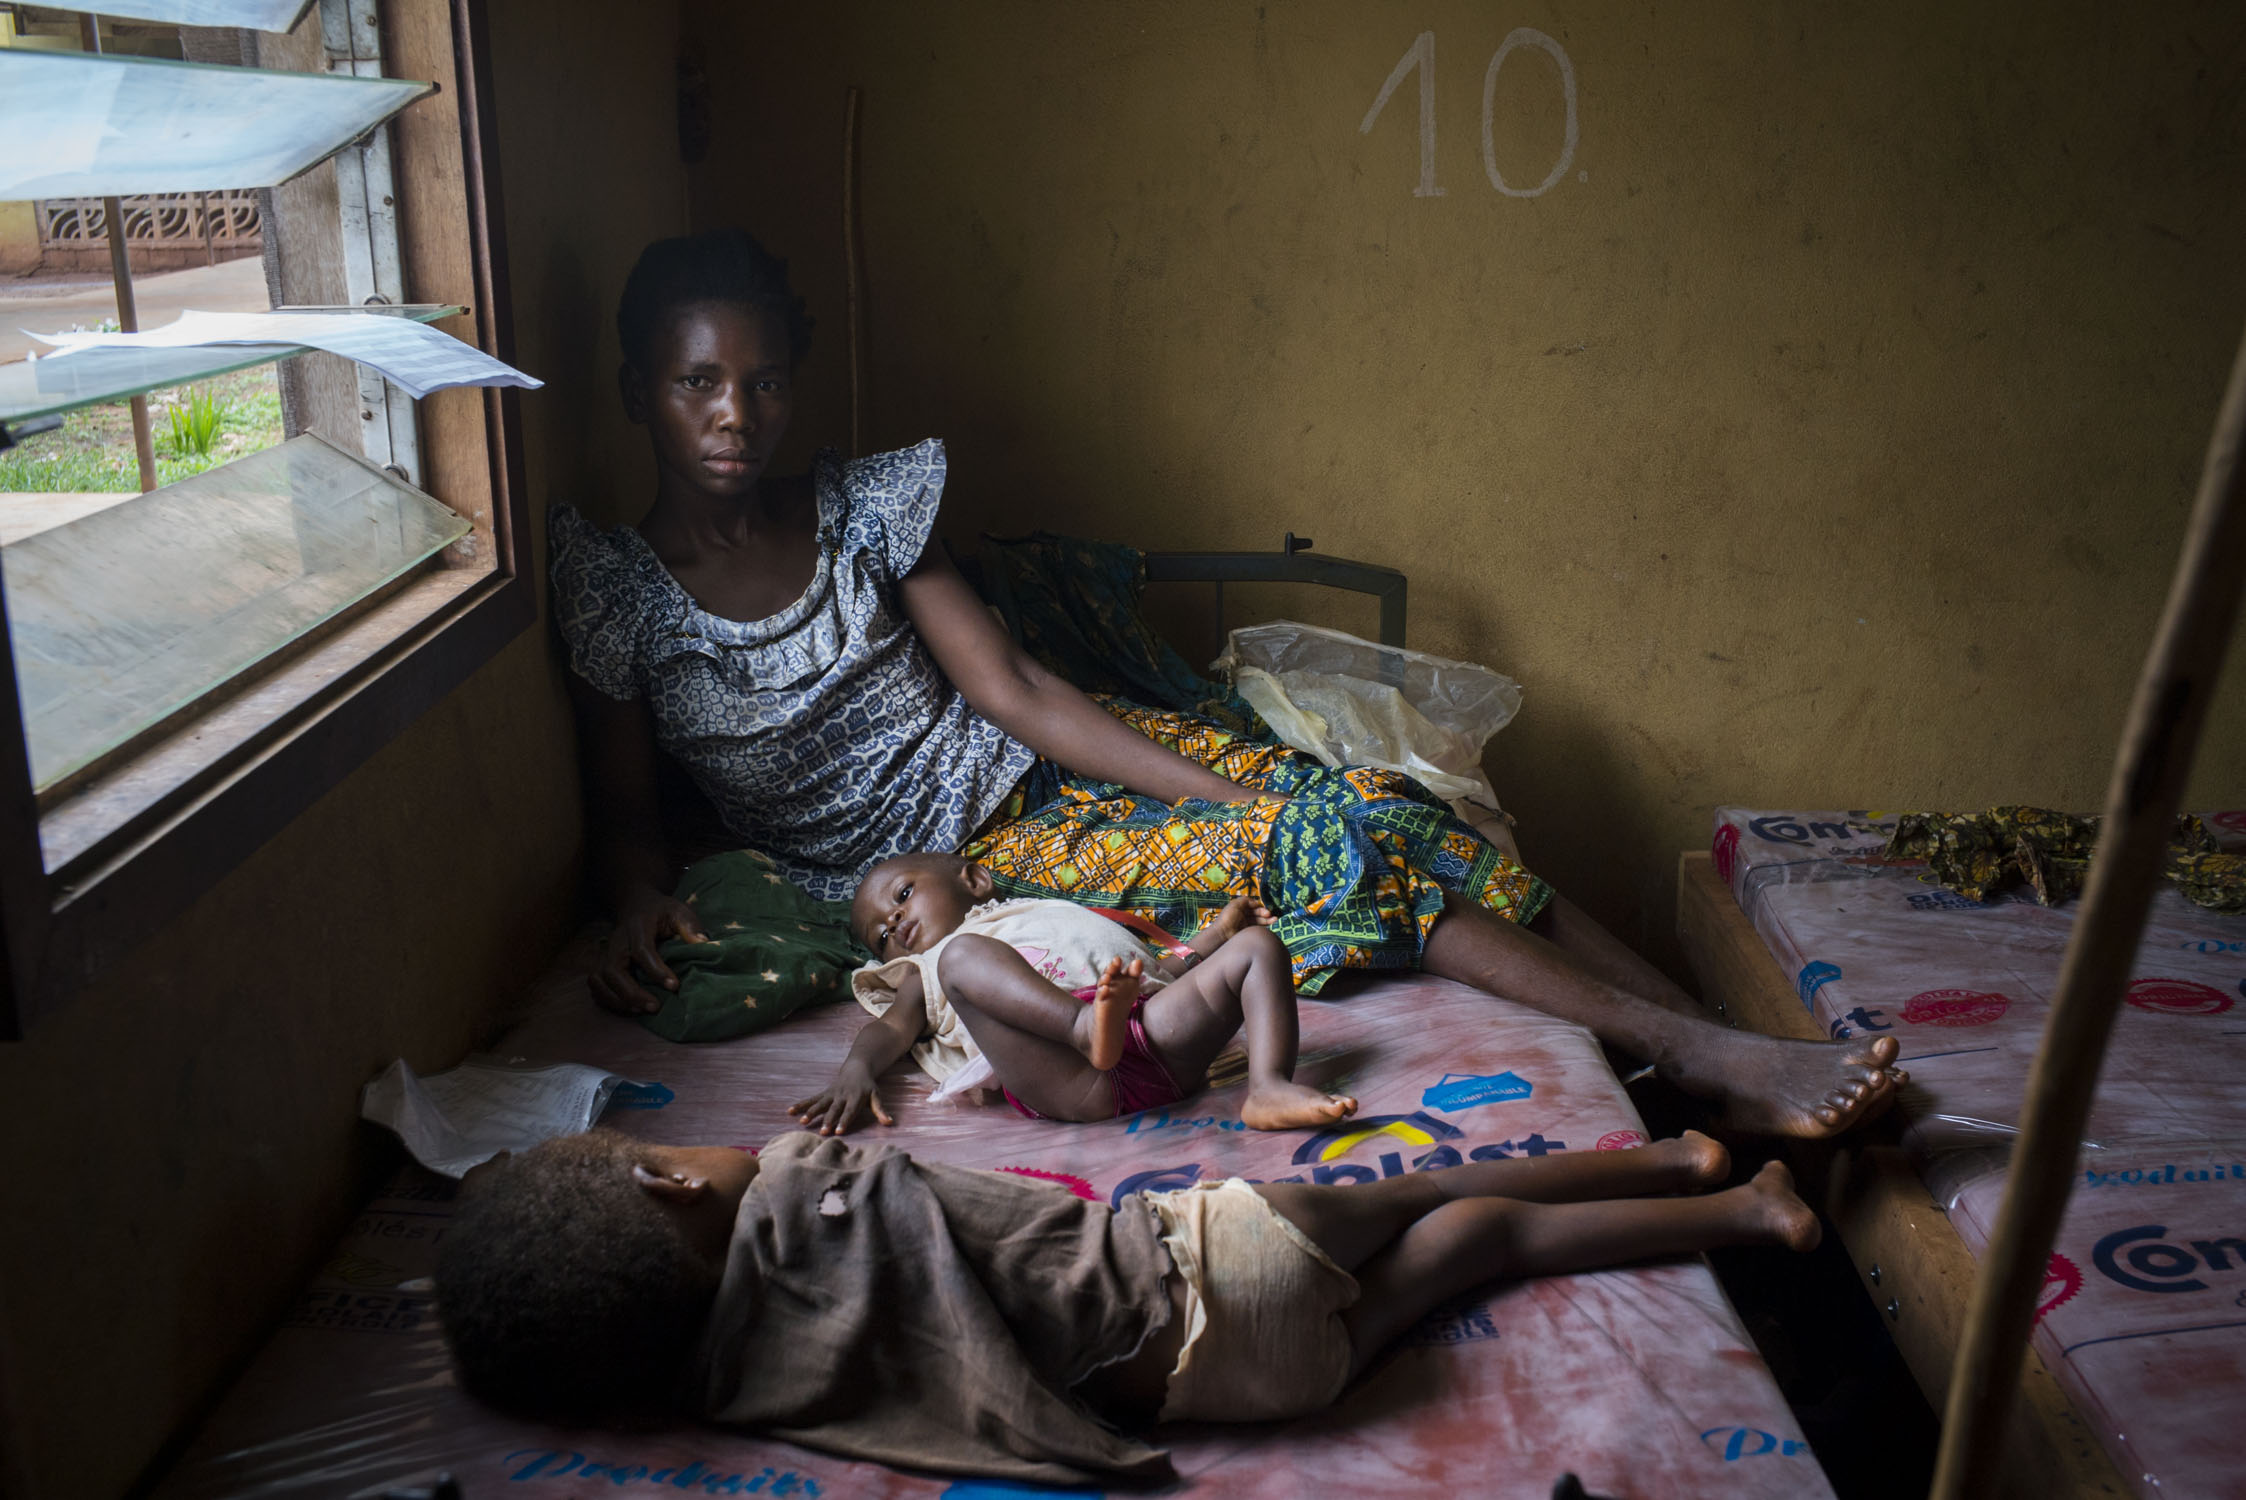  Madeleine Ngimambi, sits with her 7-month old daughter, Madeleine Pemu, who is receiving treatment for malnutrition in the MSF wing of the hospital in Monga, a town in a remote region of northern Democratic Republic of the Congo (DRC). Madeleine arr